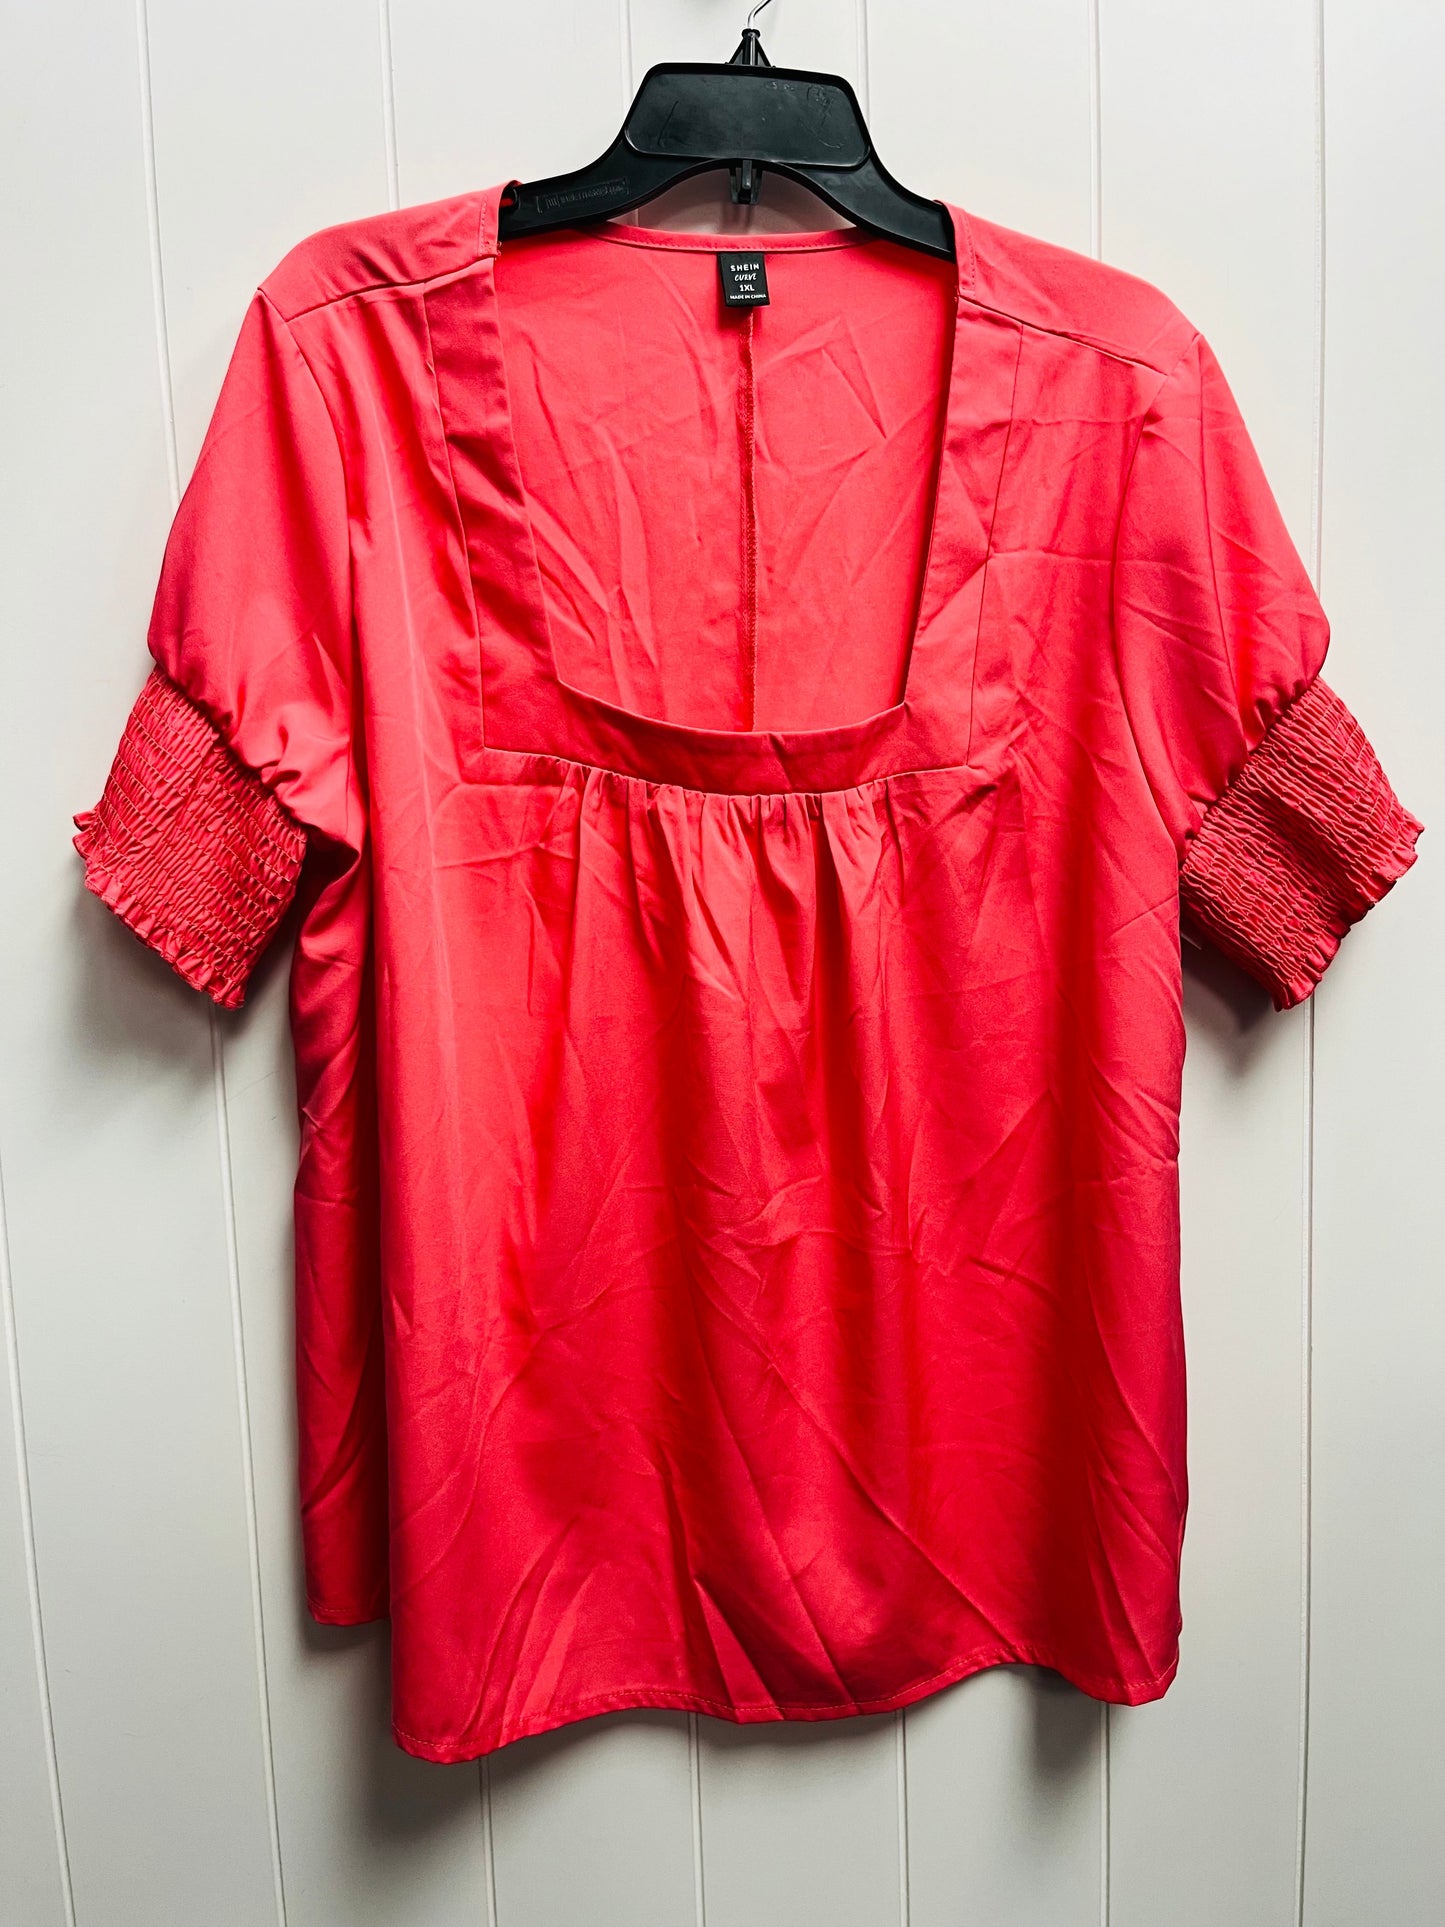 Coral Top Short Sleeve Shein, Size 1x